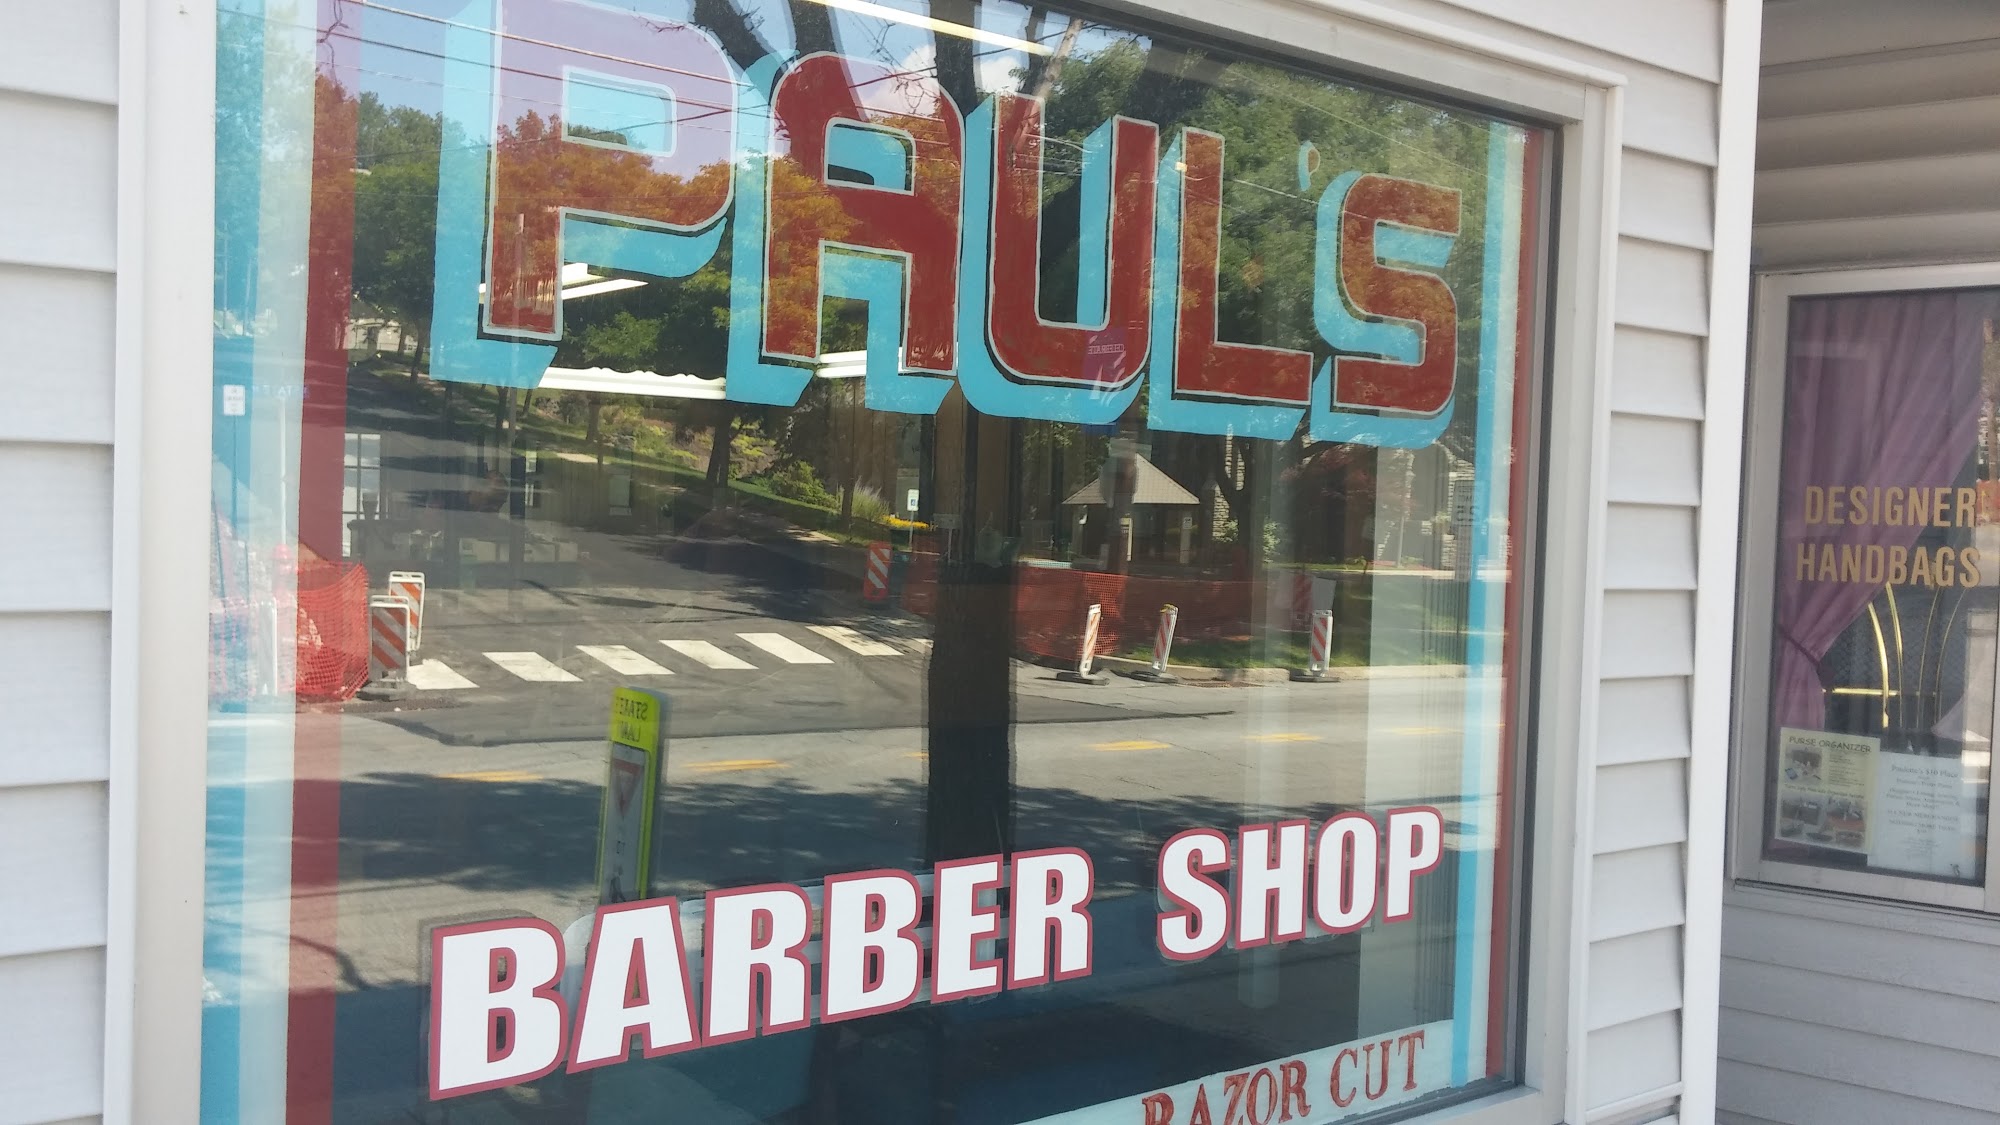 Paul's Barber Shop & Styling